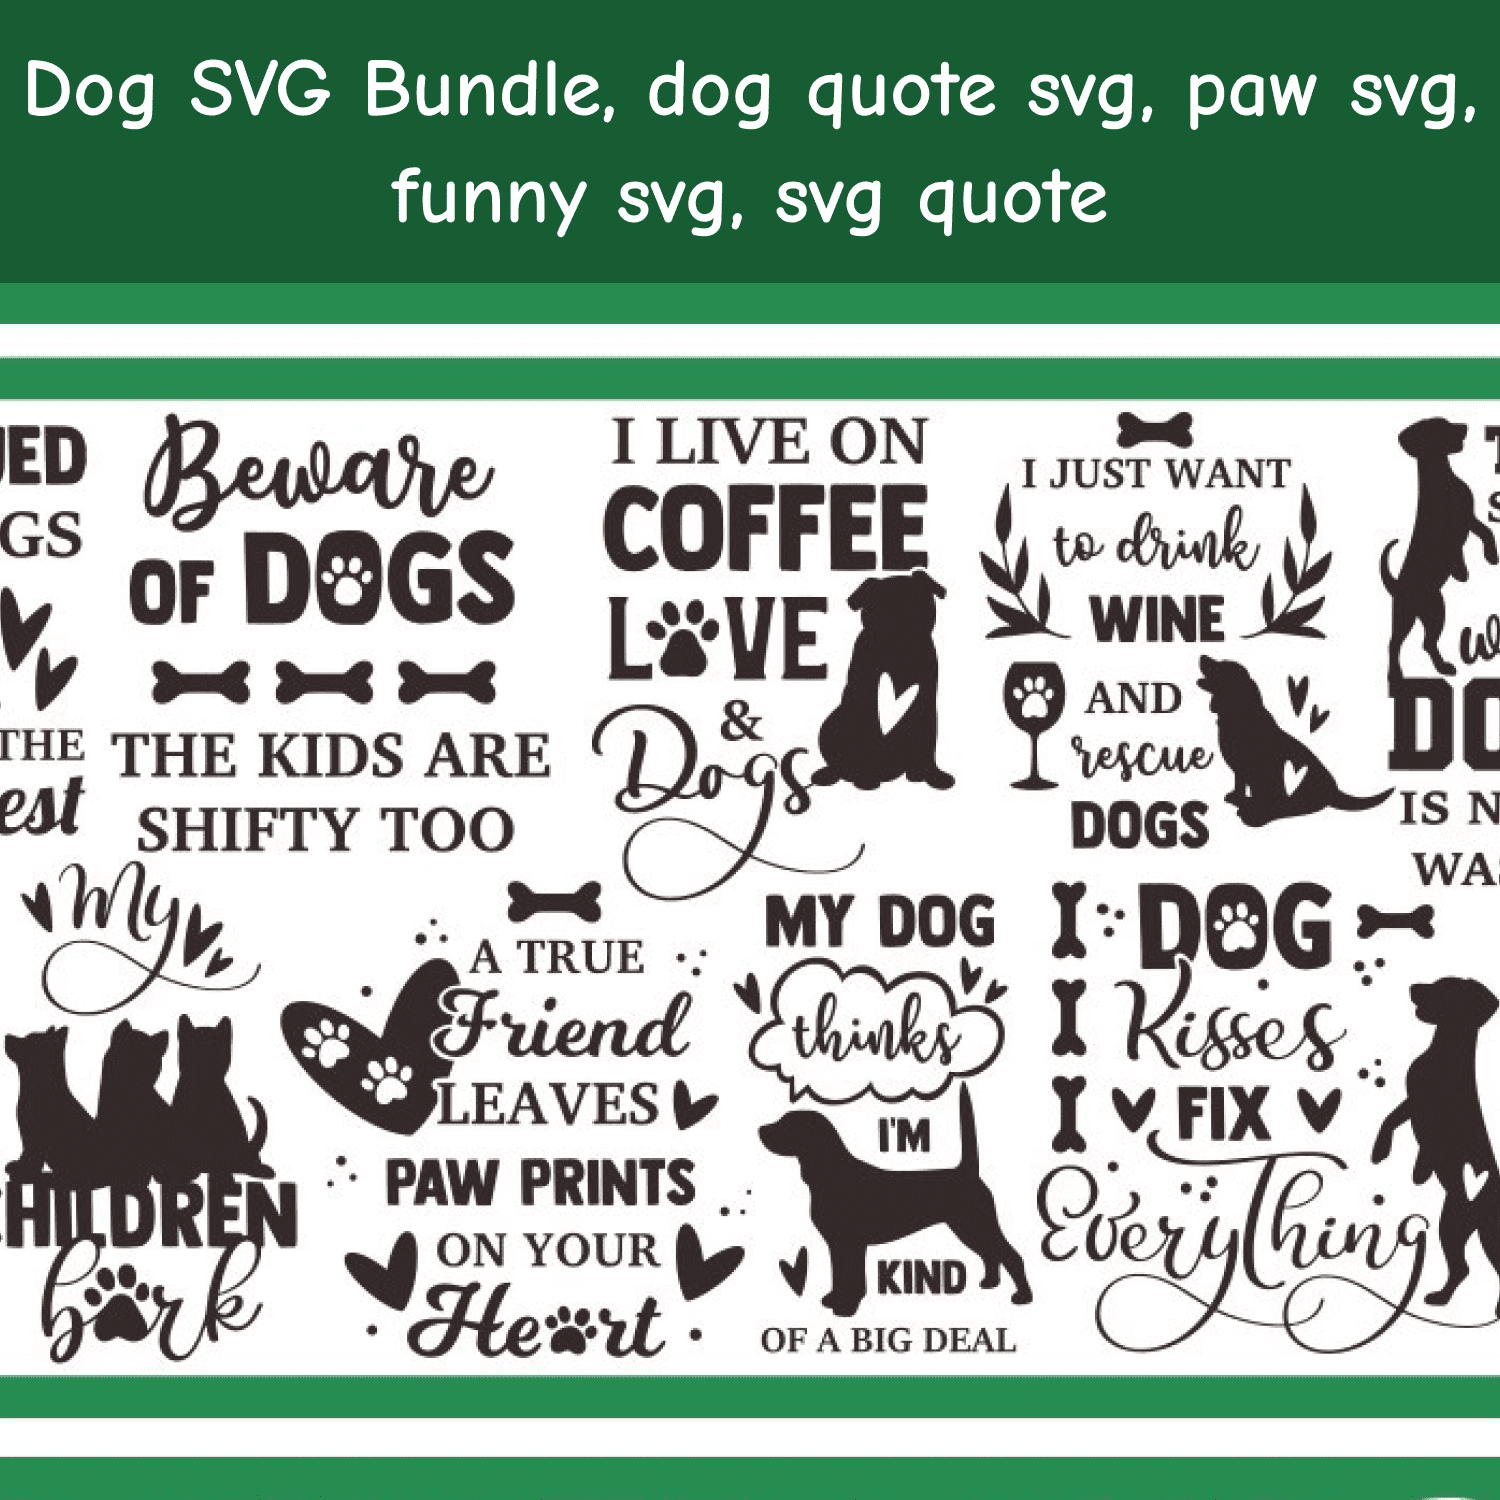 Dog SVG Bundle, dog quote svg, paw svg, funny svg, svg quote main cover.